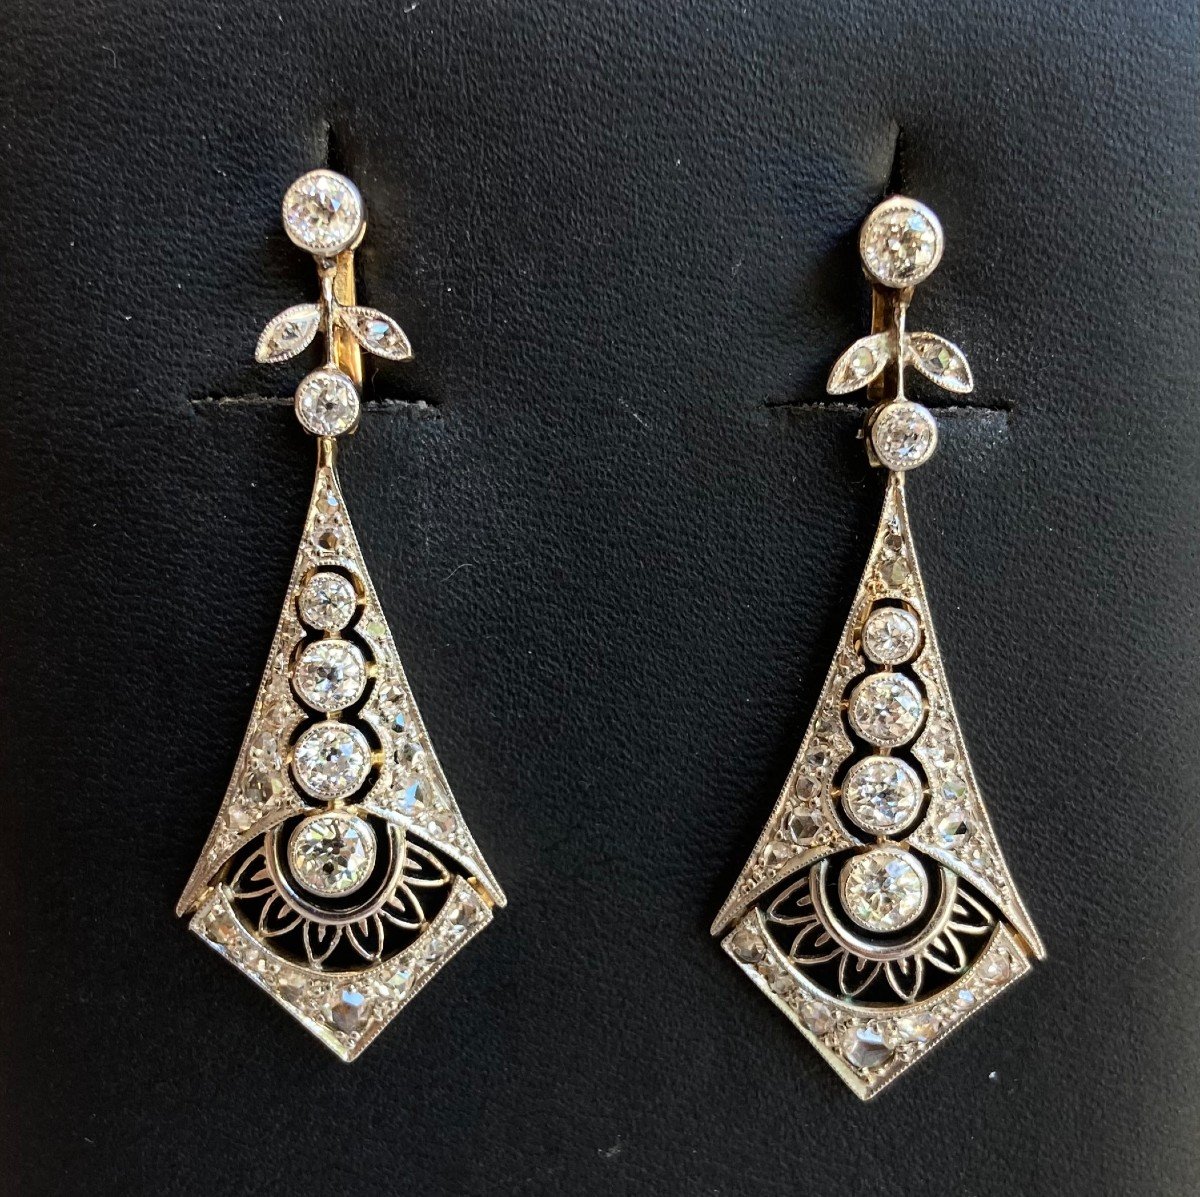 1920s Diamond, Gold And Platinum Earrings.